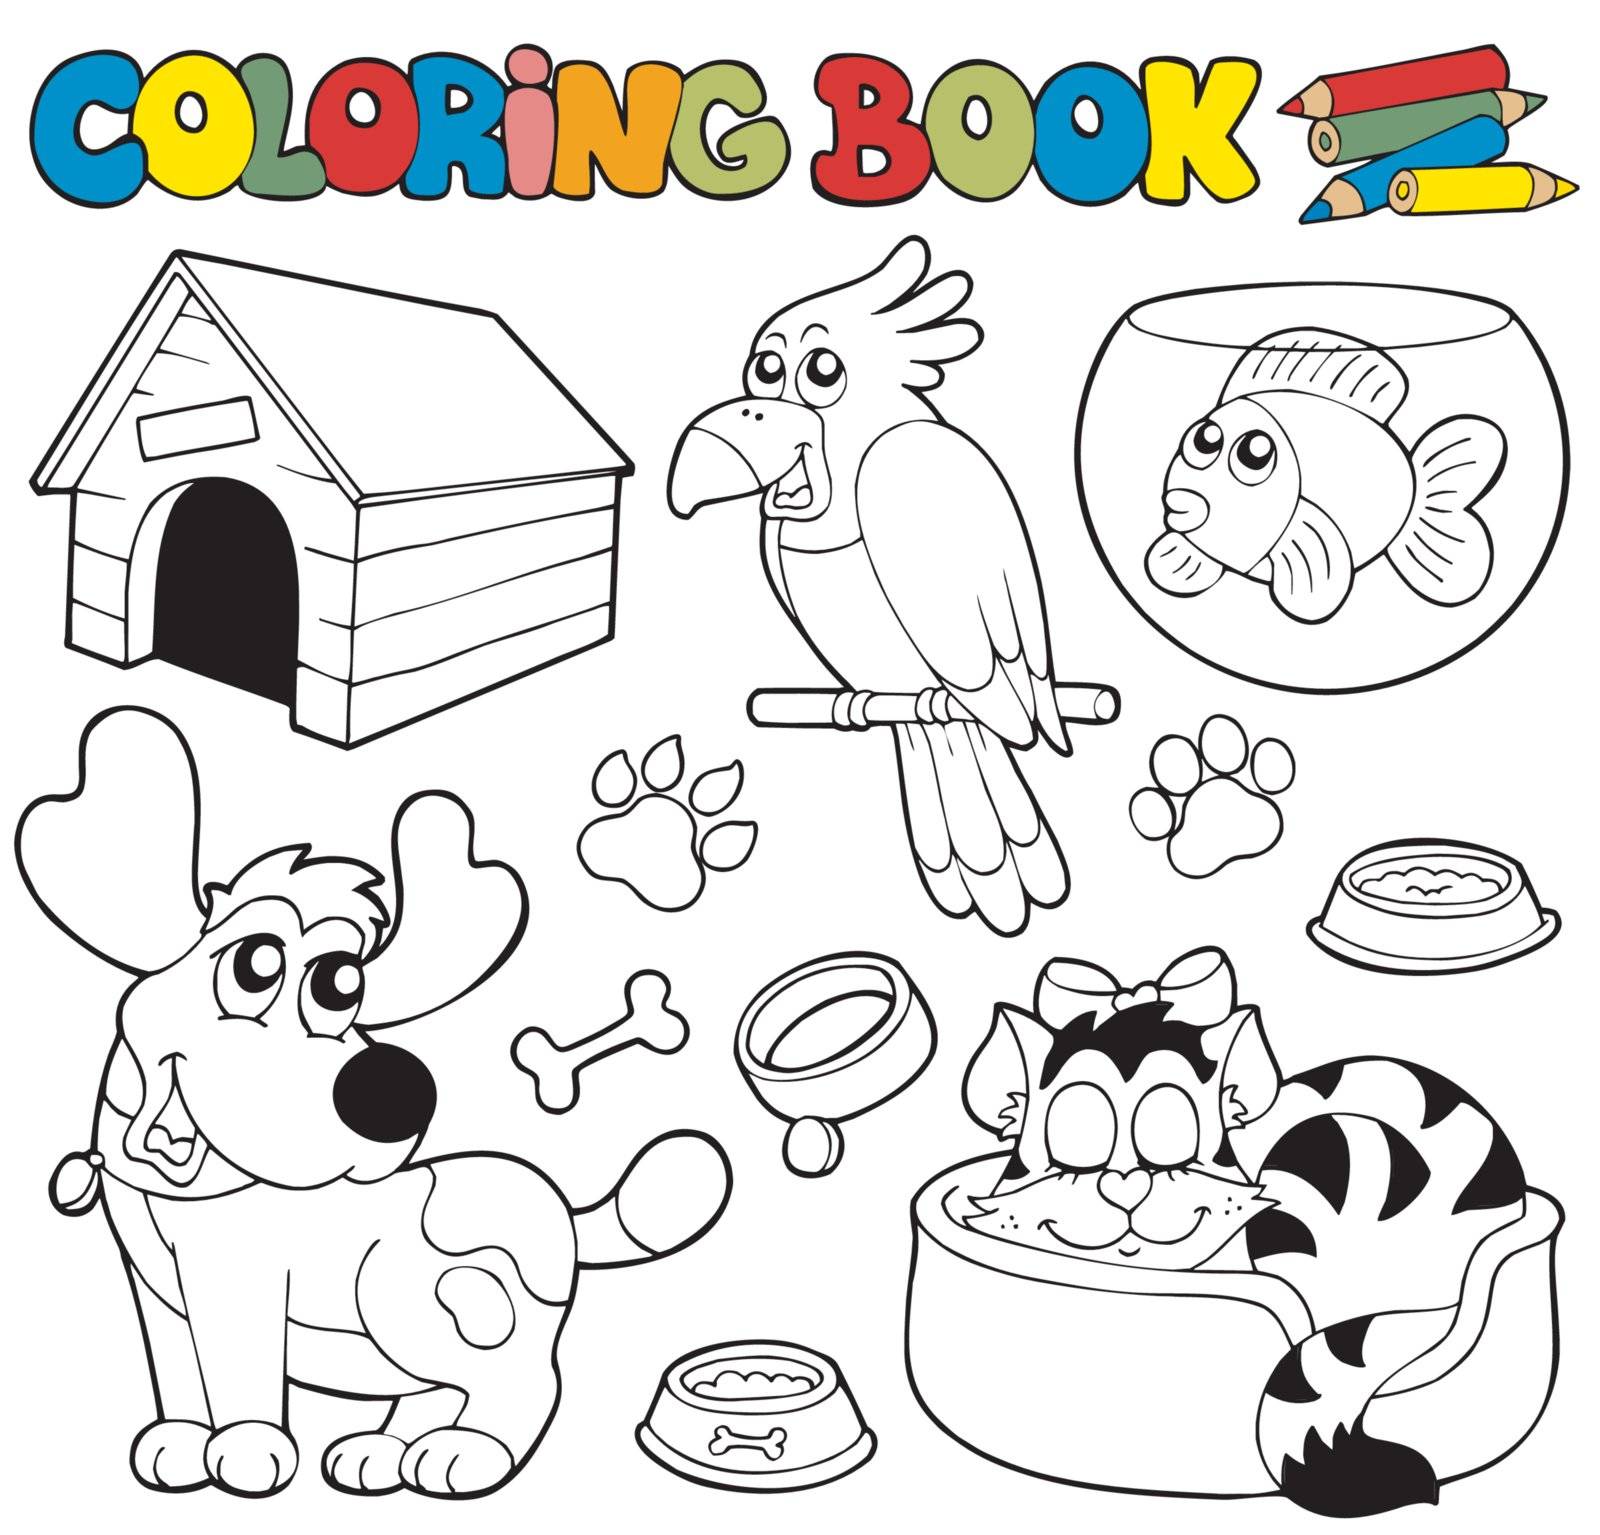 Coloring book with pets 1 by clairev